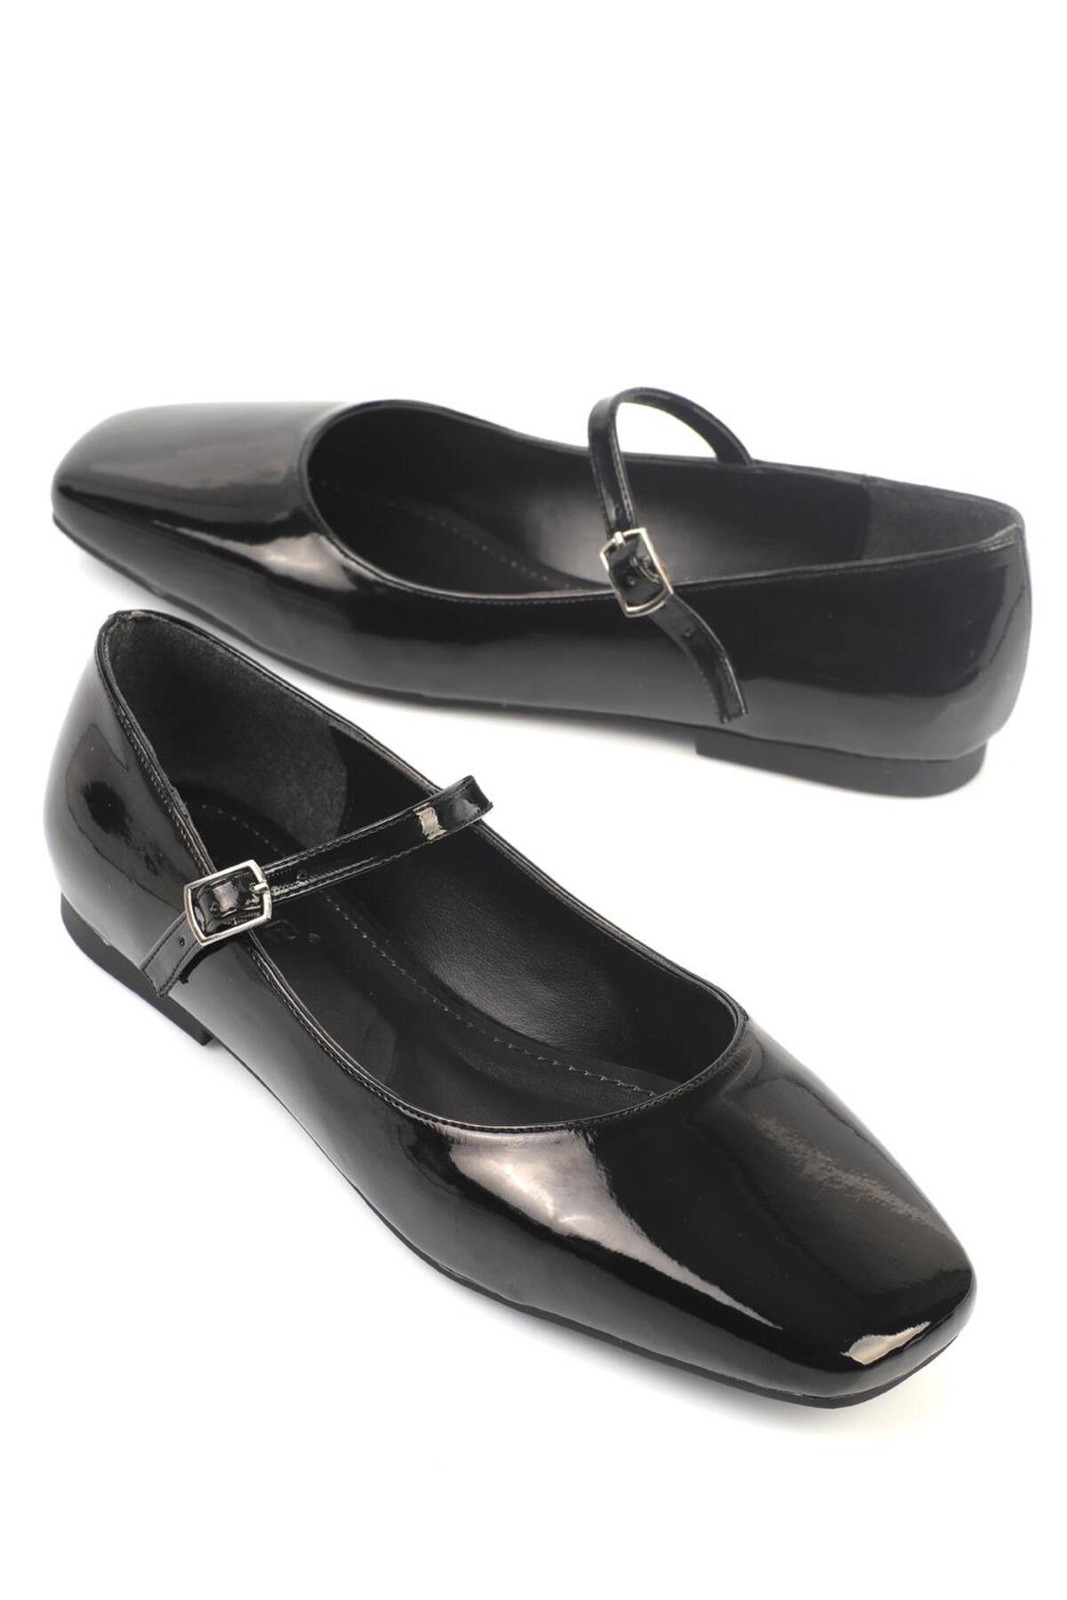 Capone Outfitters Blunt Toe Banded Margin Jane Patent Leather Black Women's Ballerinas